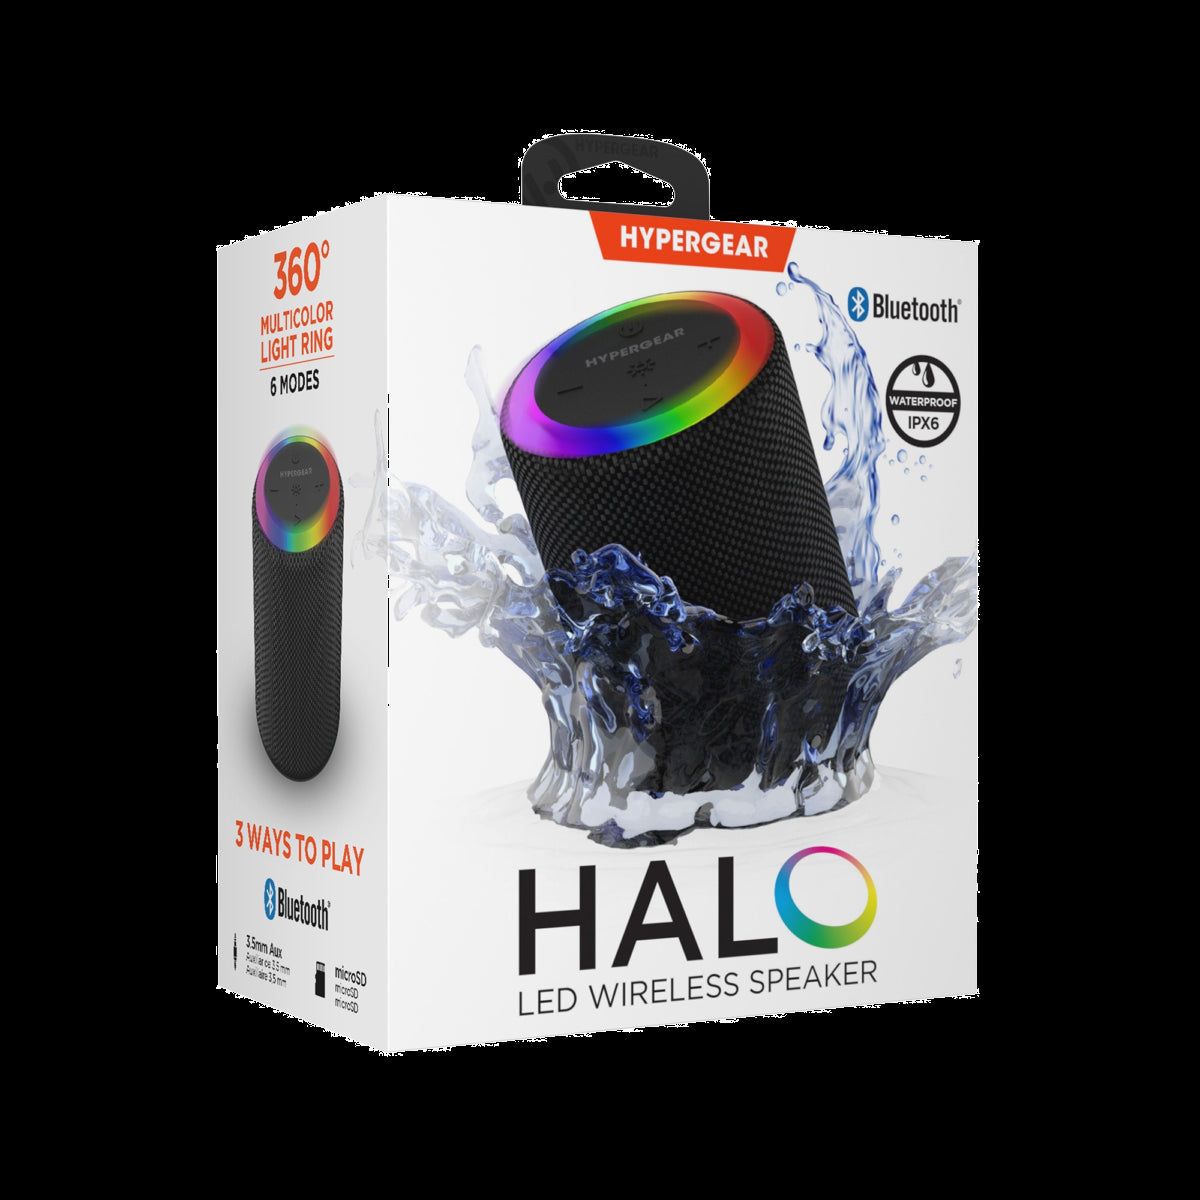 <p>The HyperGear Halo Wireless LED Speaker is a waterproof speaker designed with a dynamic multicolour beat-synced light show - perfect for pool parties!</p>